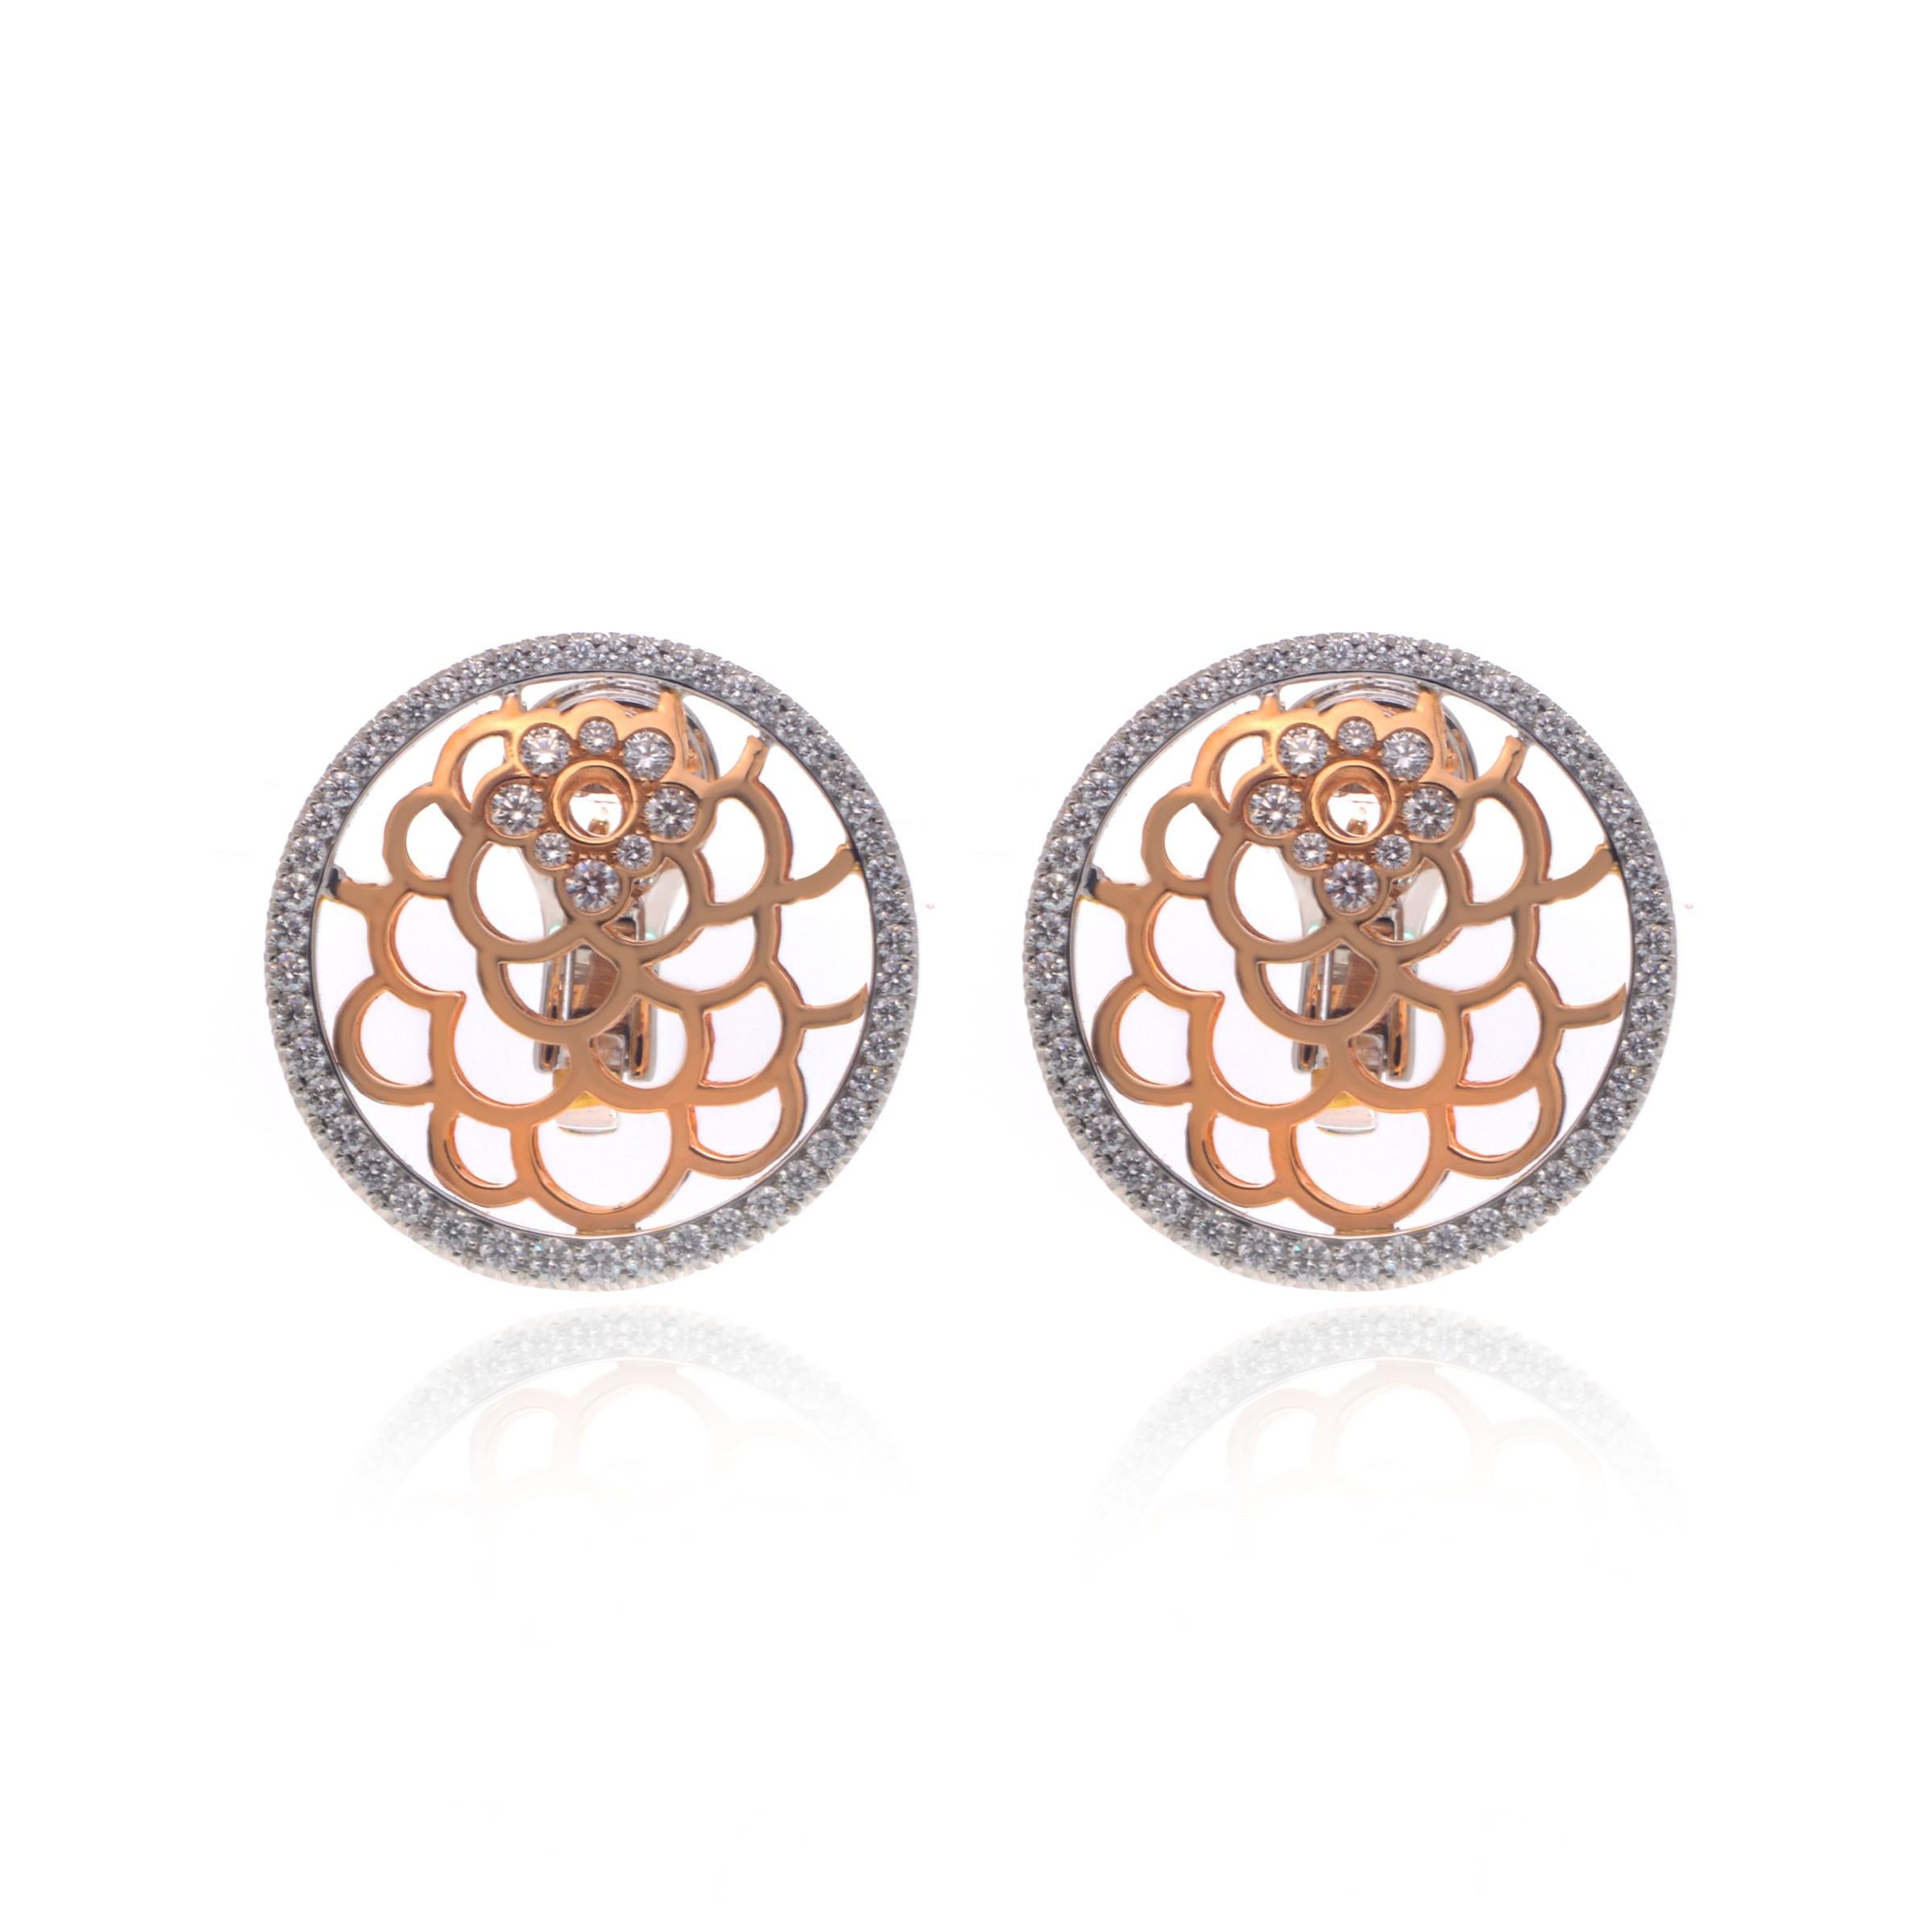 This gorgeous pair of estate earrings is finely crafted in solid 18K rose and white gold. Made in beautiful round floral design. The total diamond weight for the pair is 1.57 carats with VVS clarity and G color. Each earring measures 26mm. The